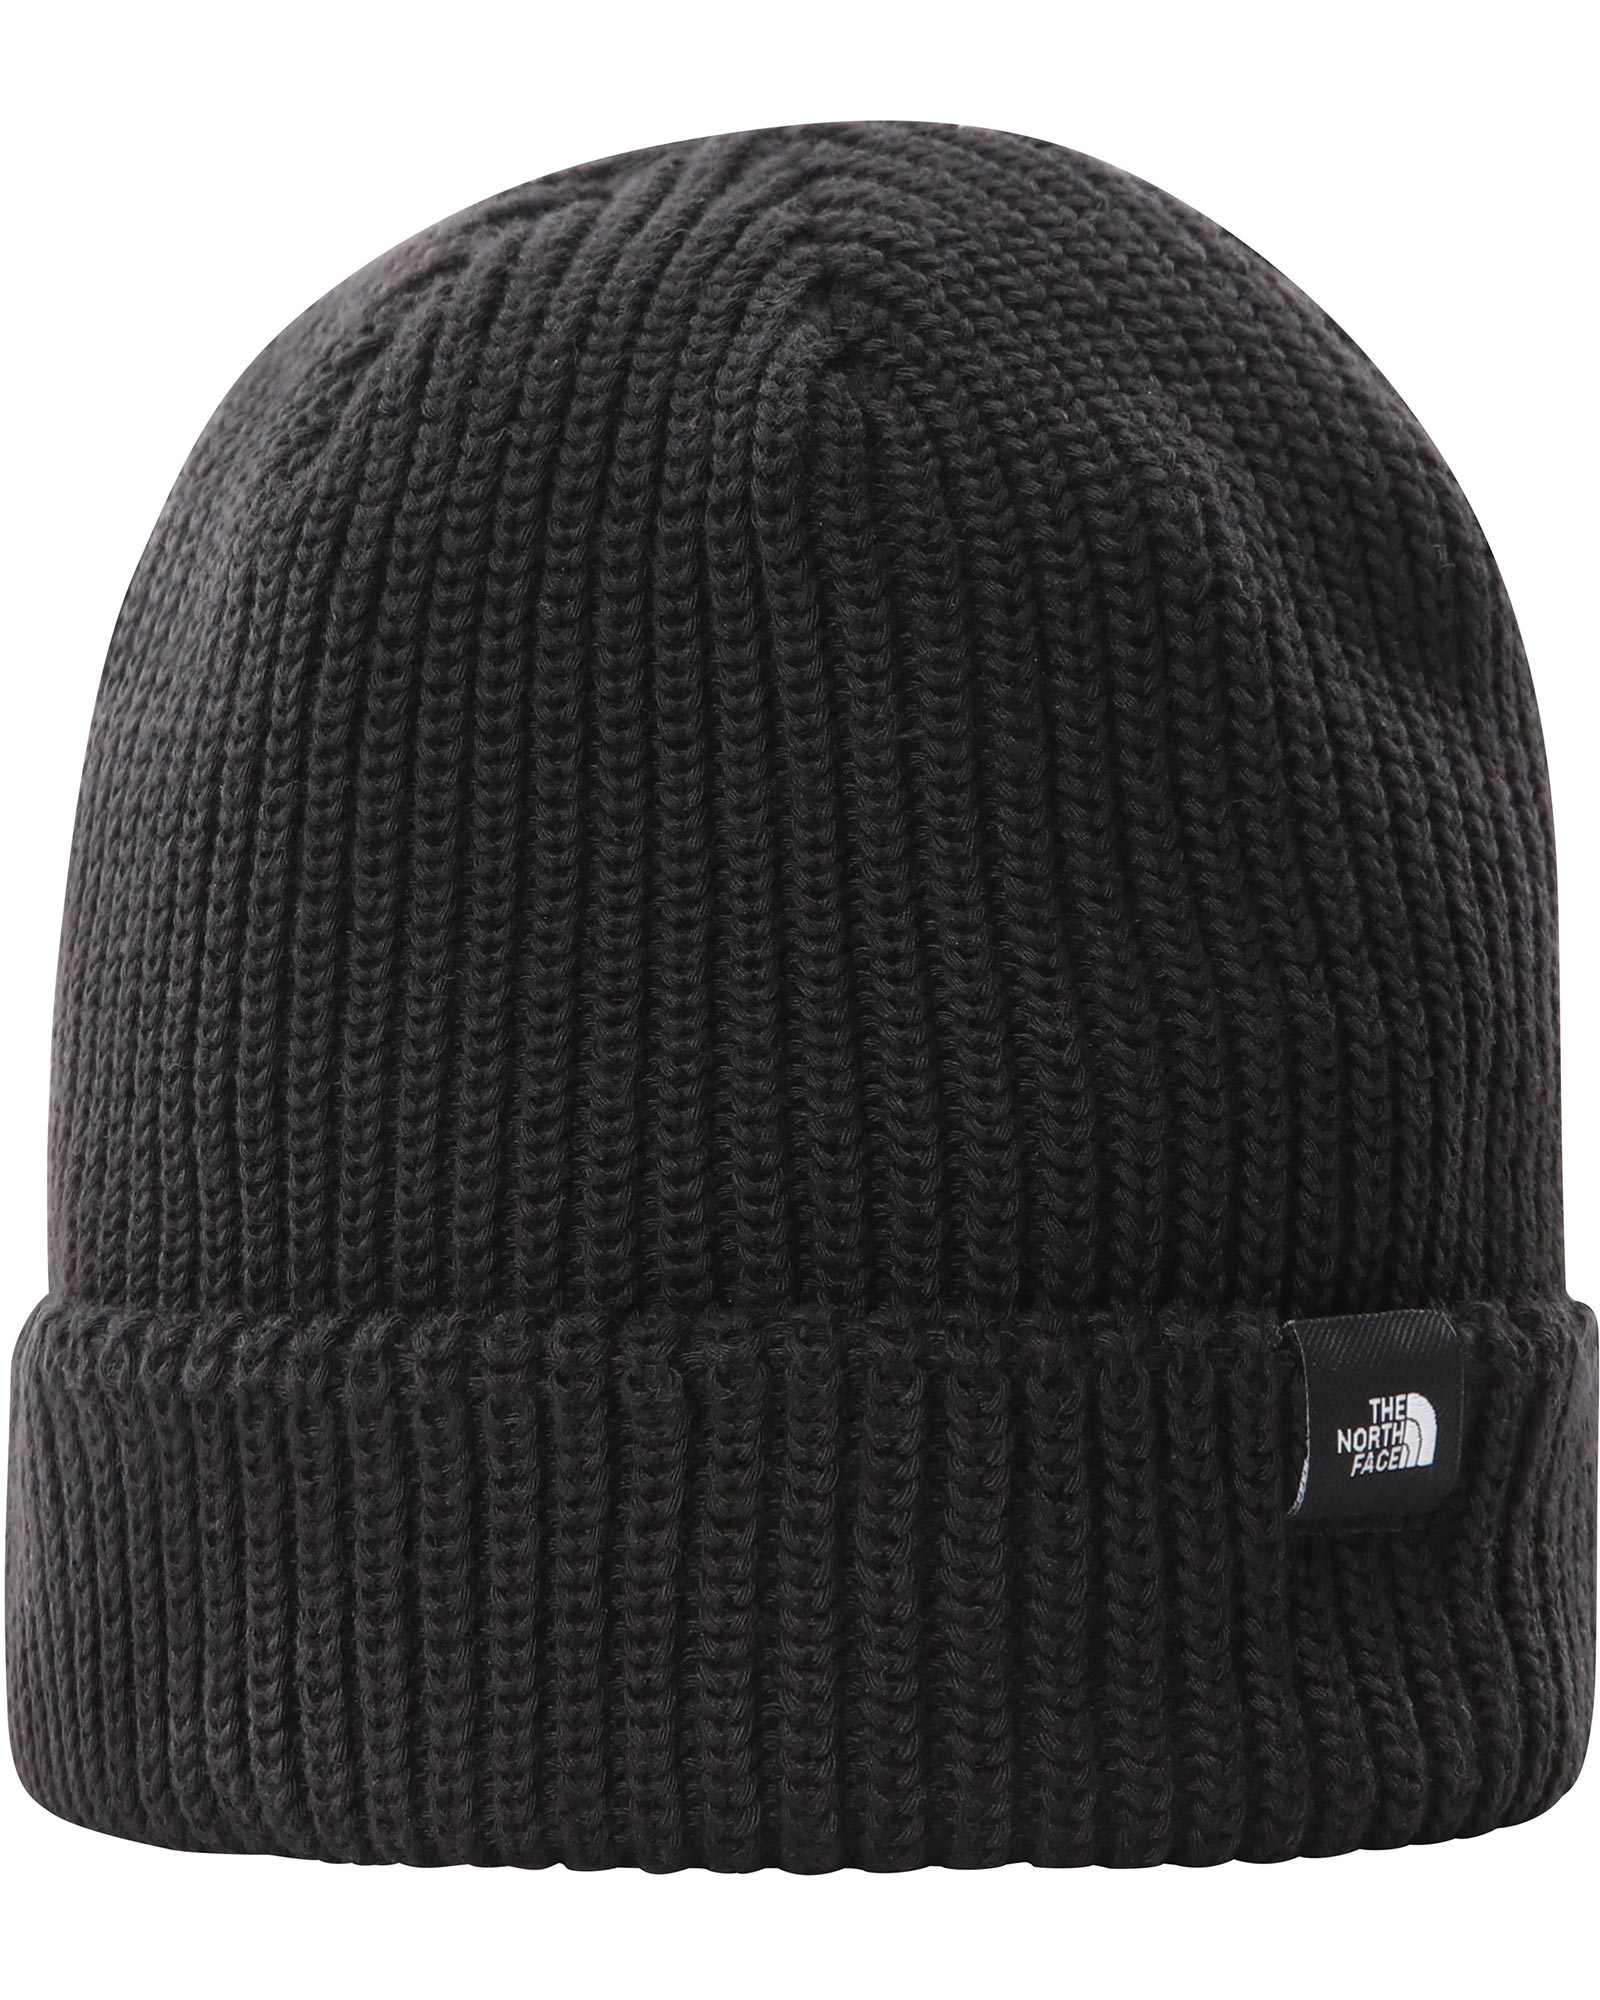 The North Face TNF Fishermans Beanie - TNF Black